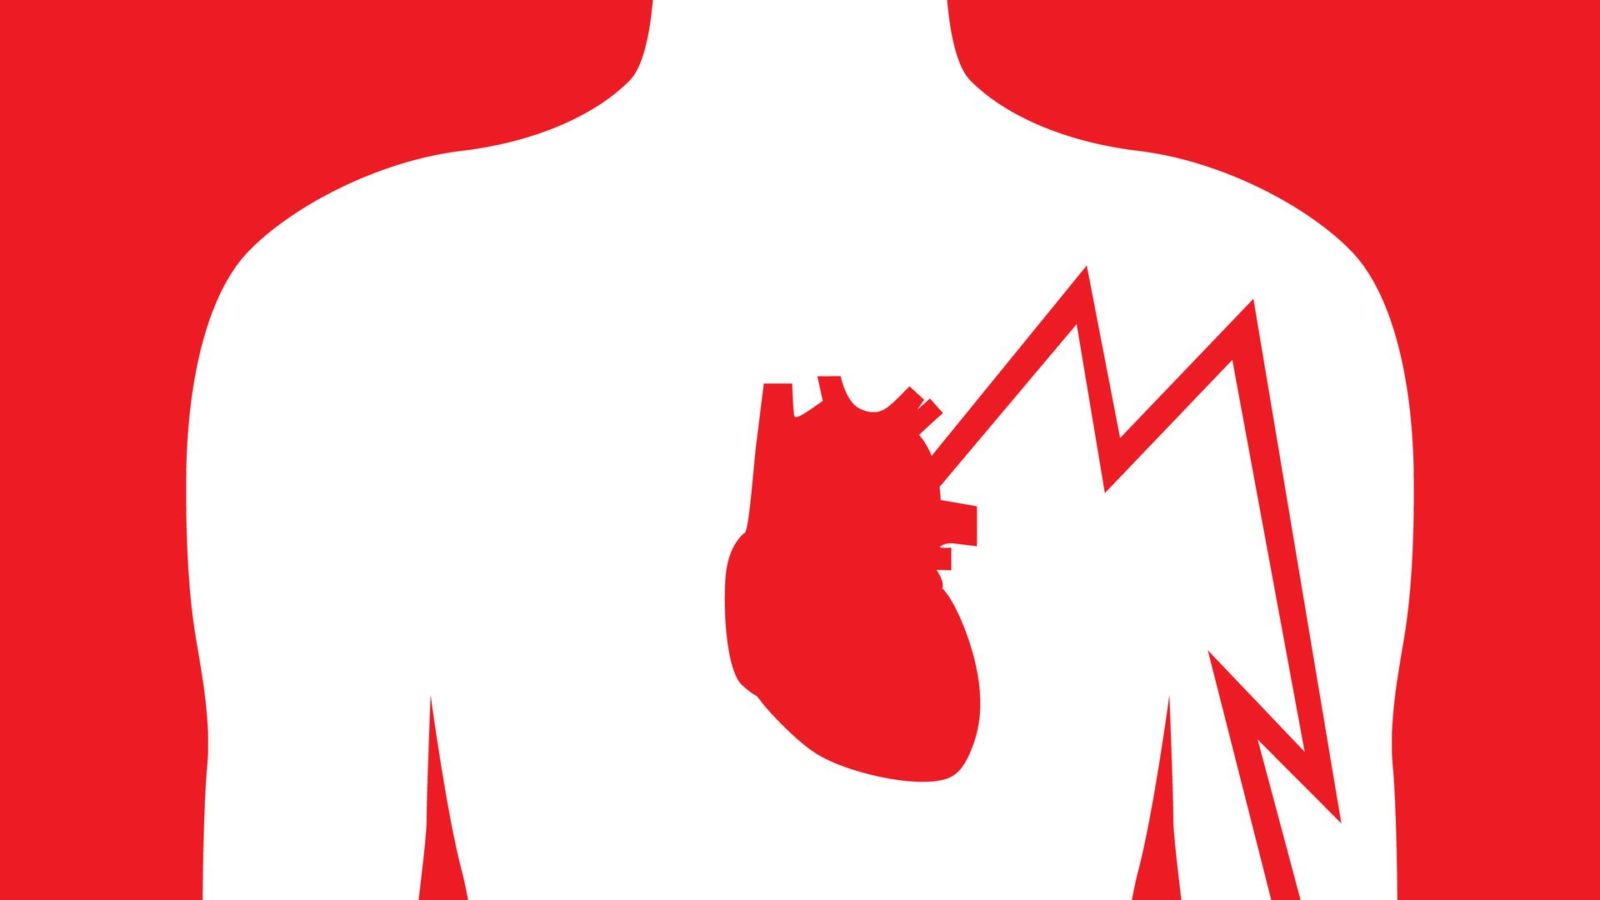 What Should You Do If Someone is Having a Heart Attack?